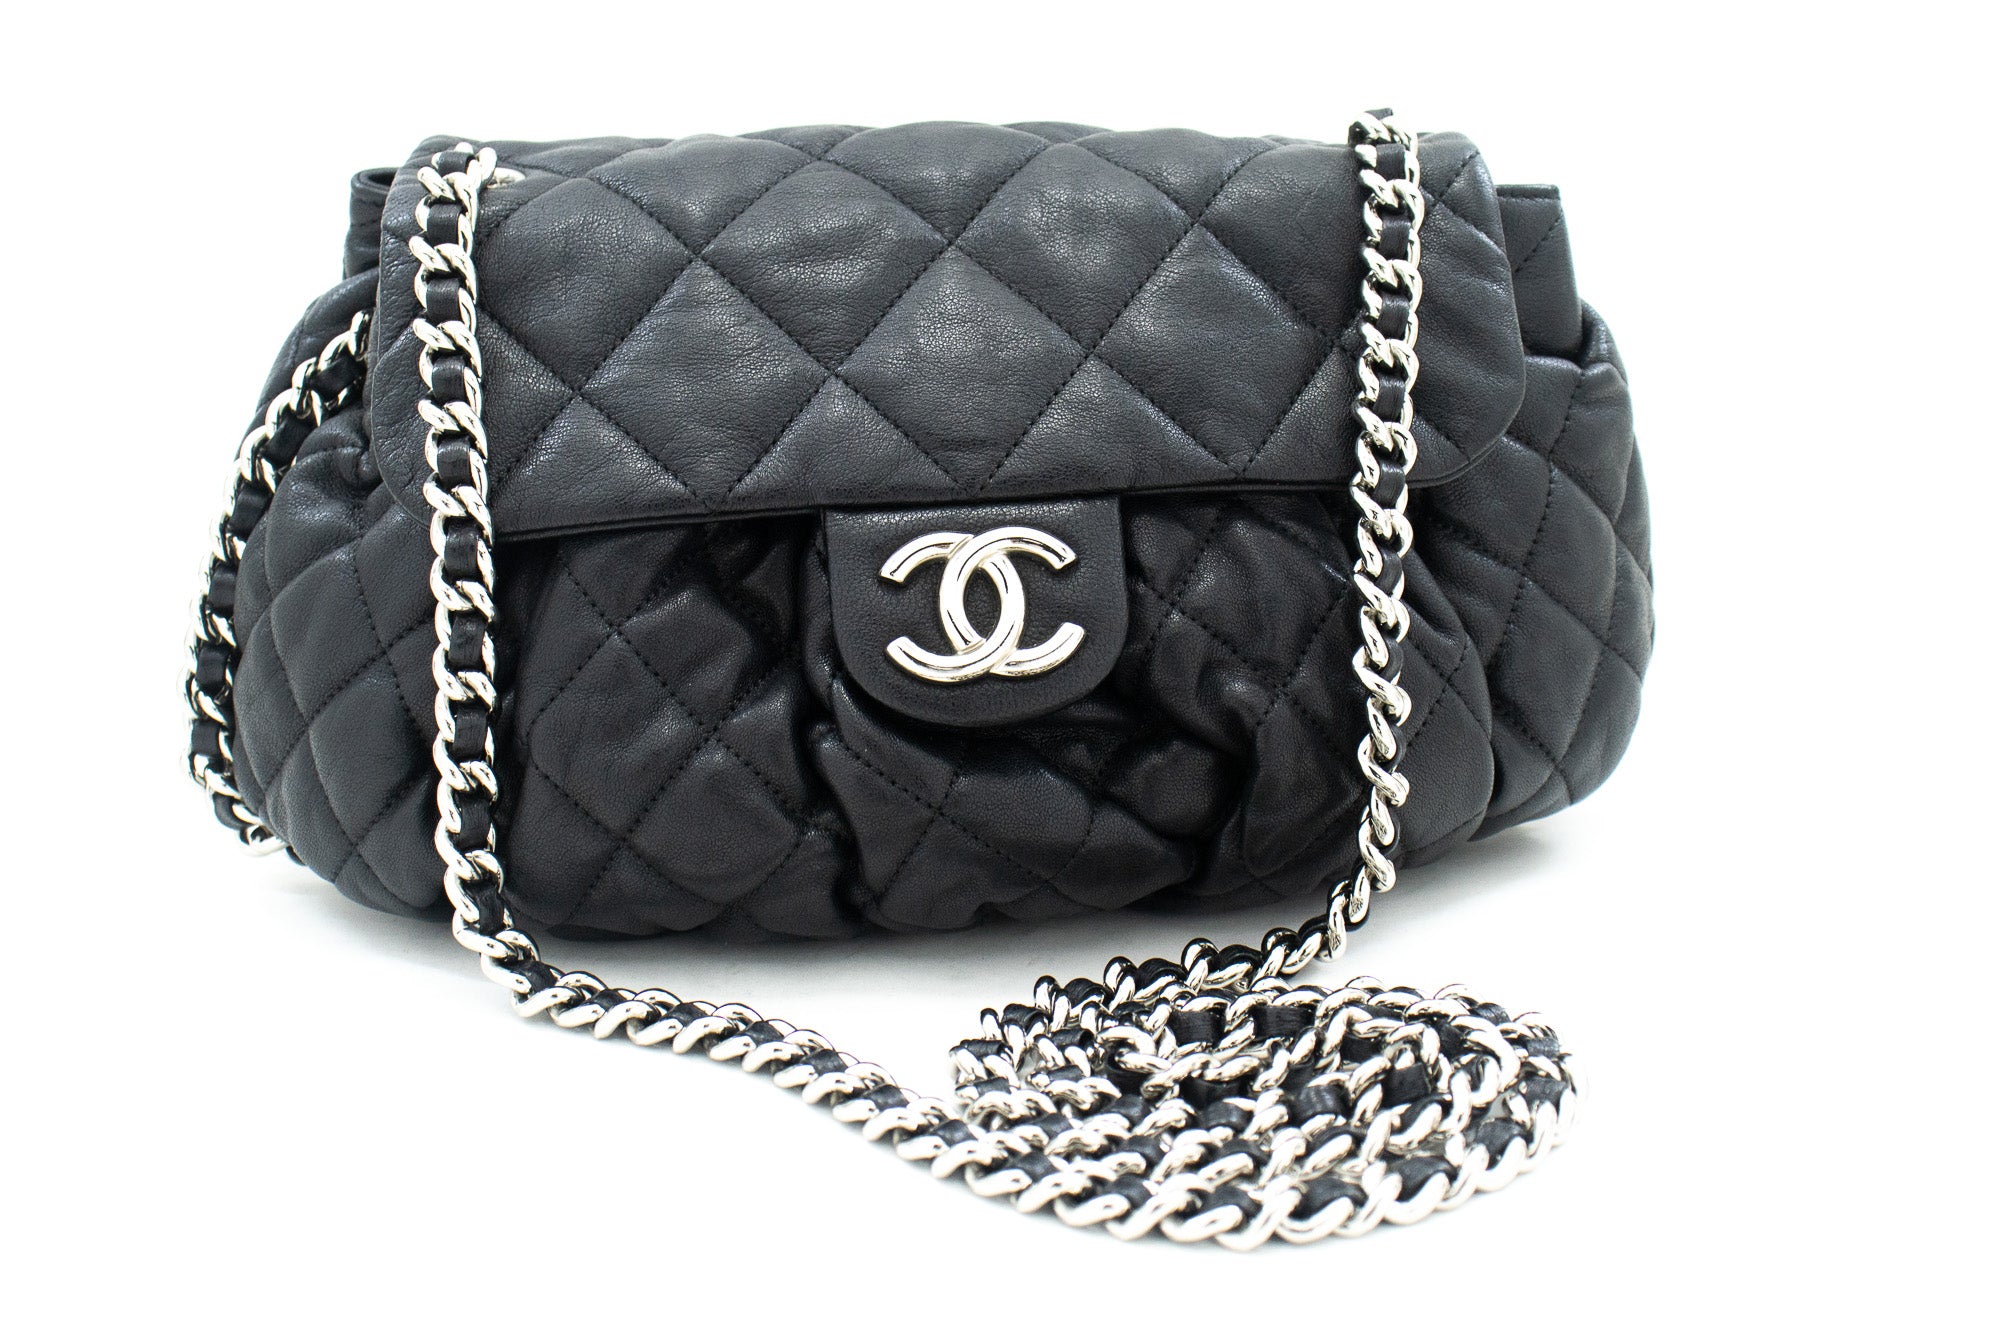 CHANEL CHAIN AROUND MESSENGER BAG, black quilted leather with silver tone  hardware, chain and leather strap and around the edges of the bag, cream  fabric lining, authenticity card, original box, 30cm x